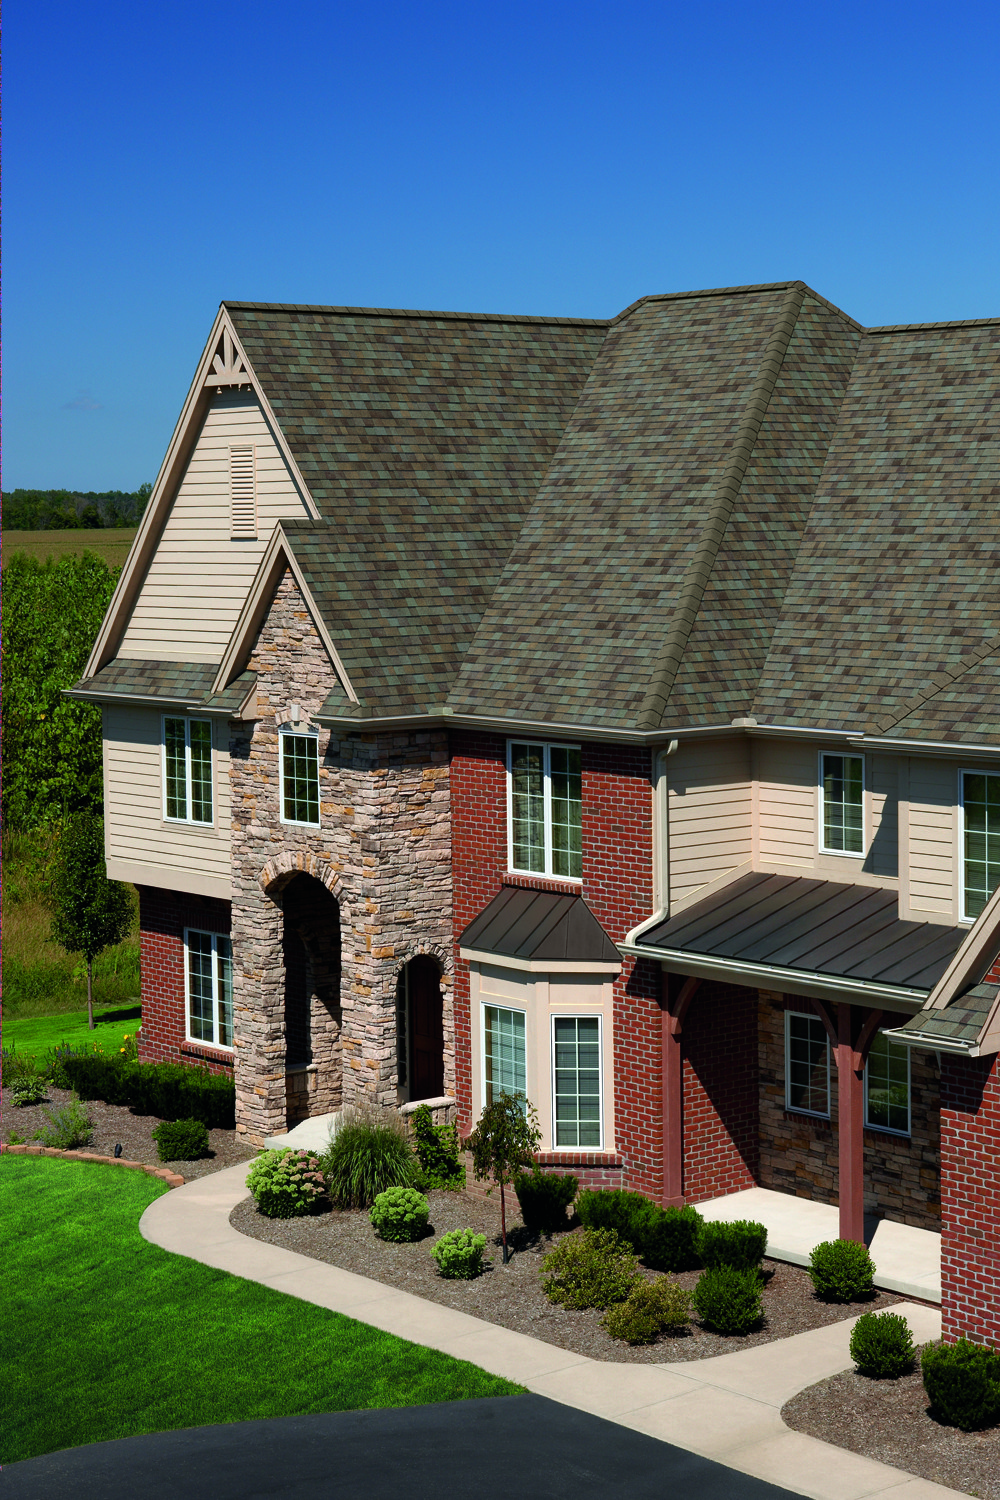 Owens Corning TruDefinition Duration in Driftwood